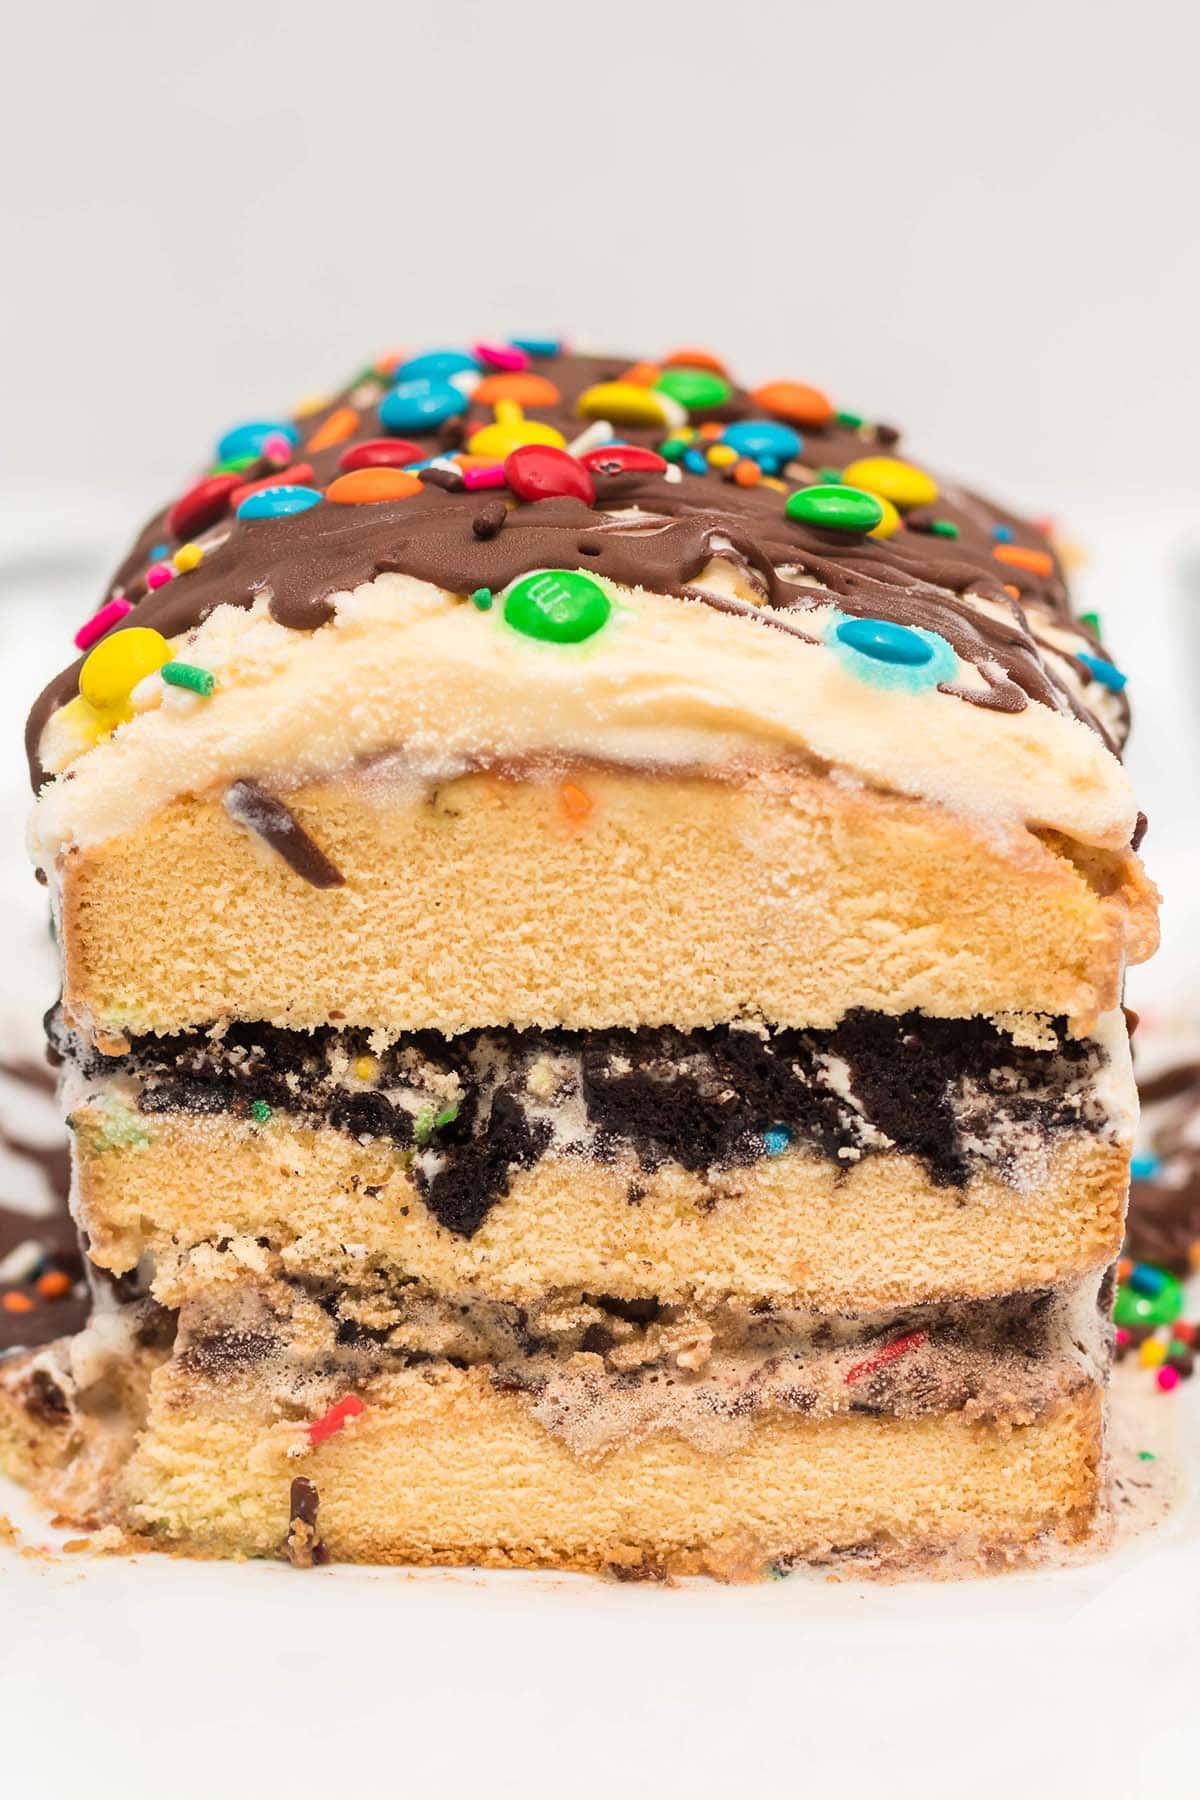 ice cream cake with pound cakes and oreo filling.